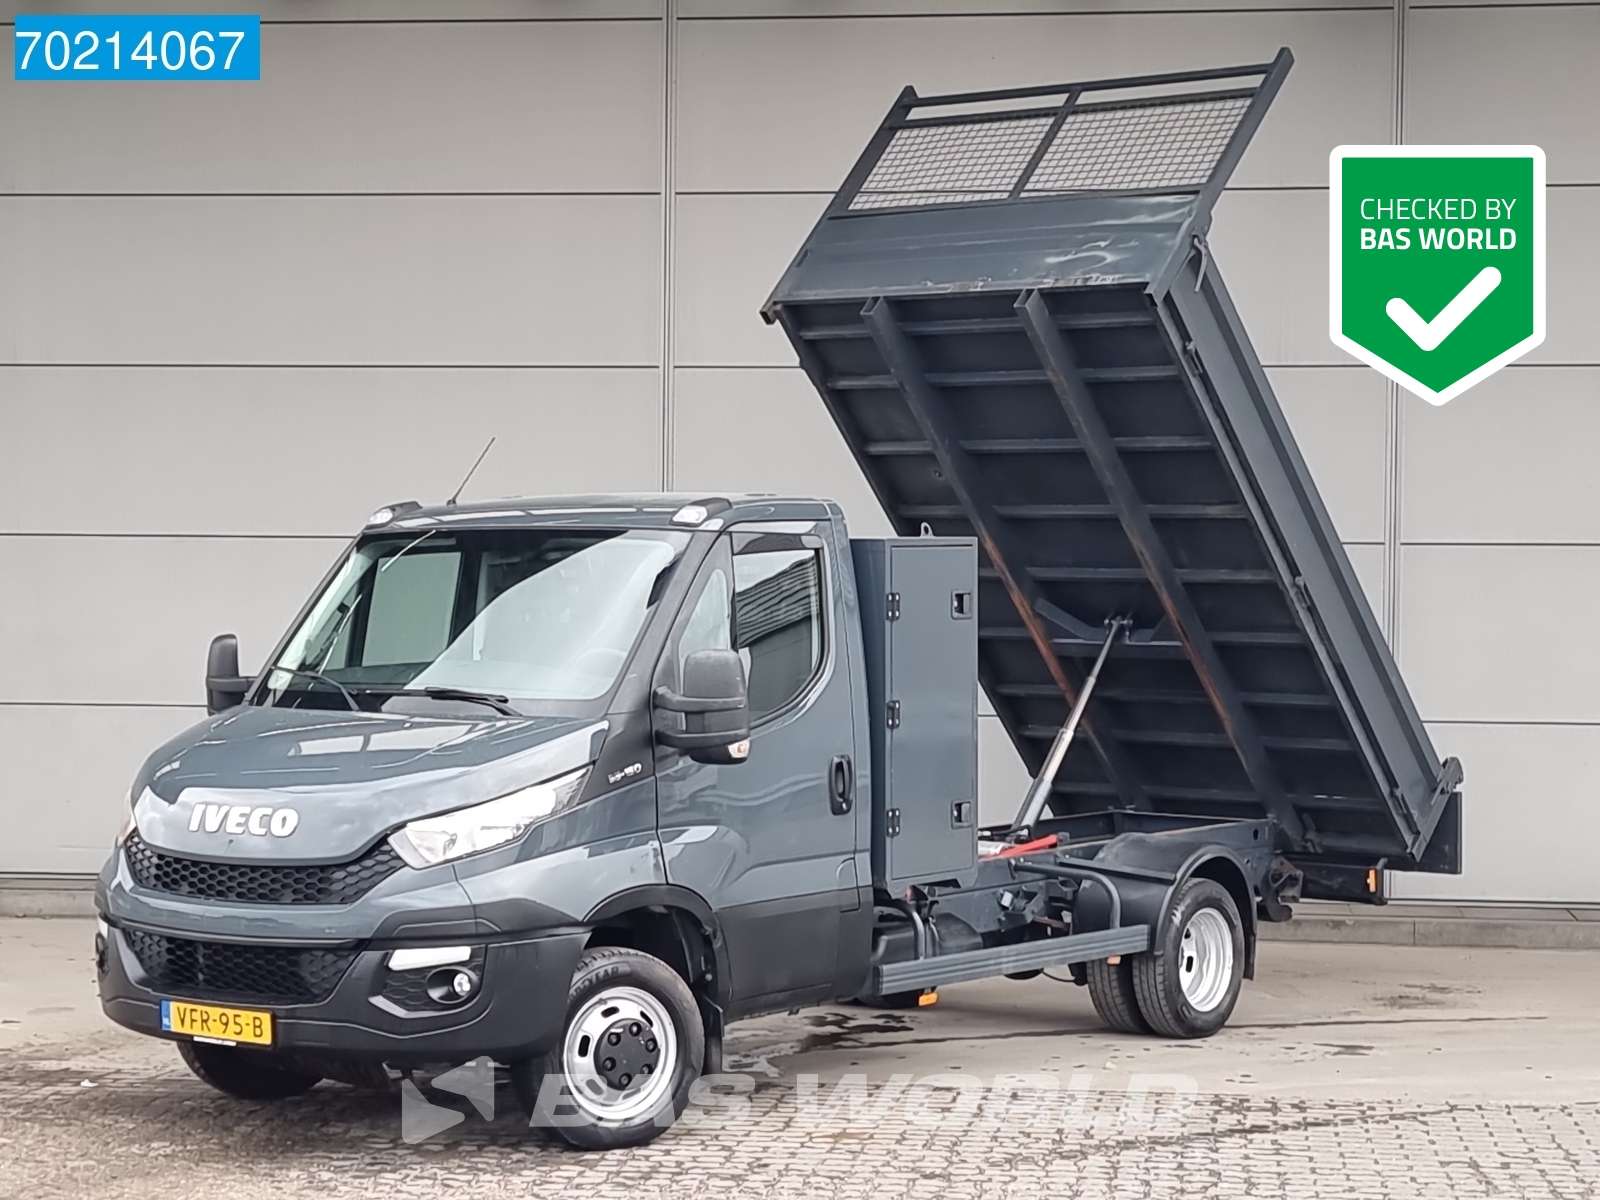 Iveco Daily Transporter in Grey used in VEGHEL for € 26,318.-